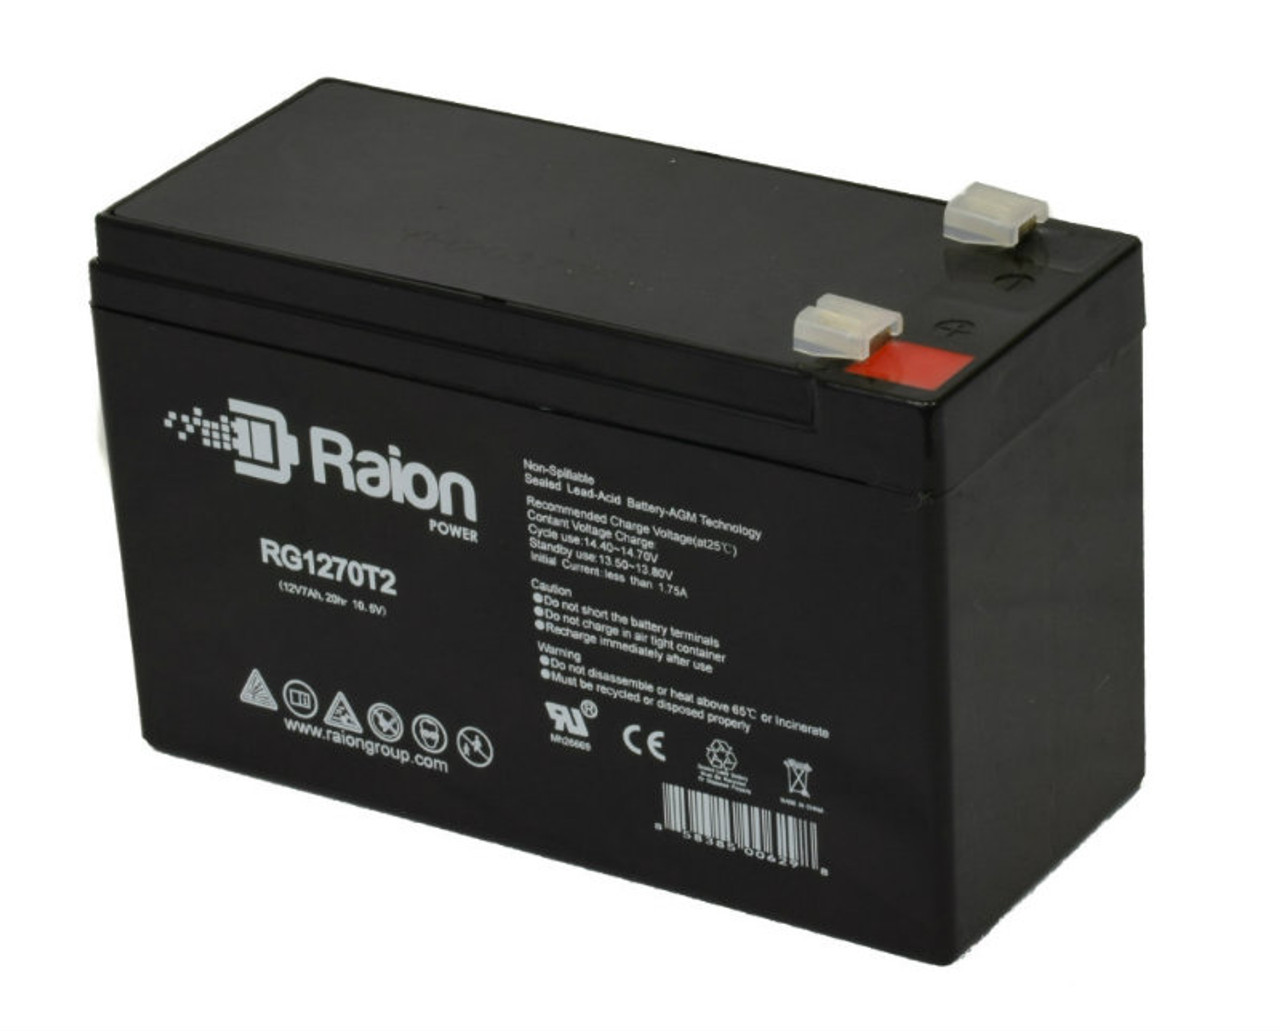 Raion Power RG1270T1 12V 7Ah Non-Spillable Replacement Battery for Panasonic LC-R127R2P(a)